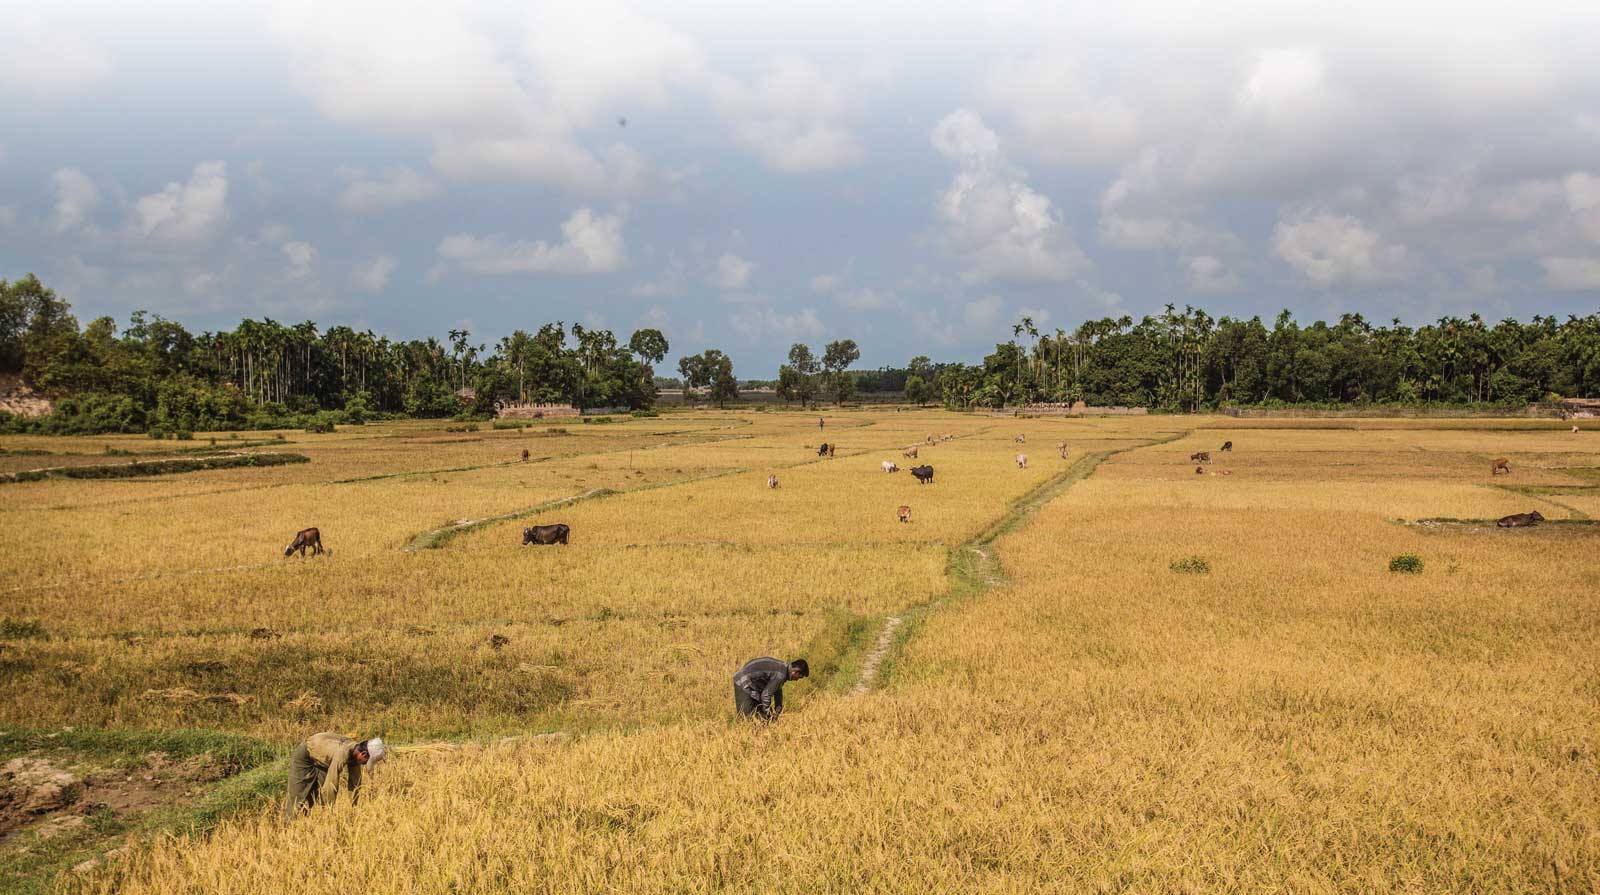 Maungdaw, Myanmar - Farm laborers and livestock in a paddy field in Warcha village April 2016. Image: FAO / Hkun Land Institute